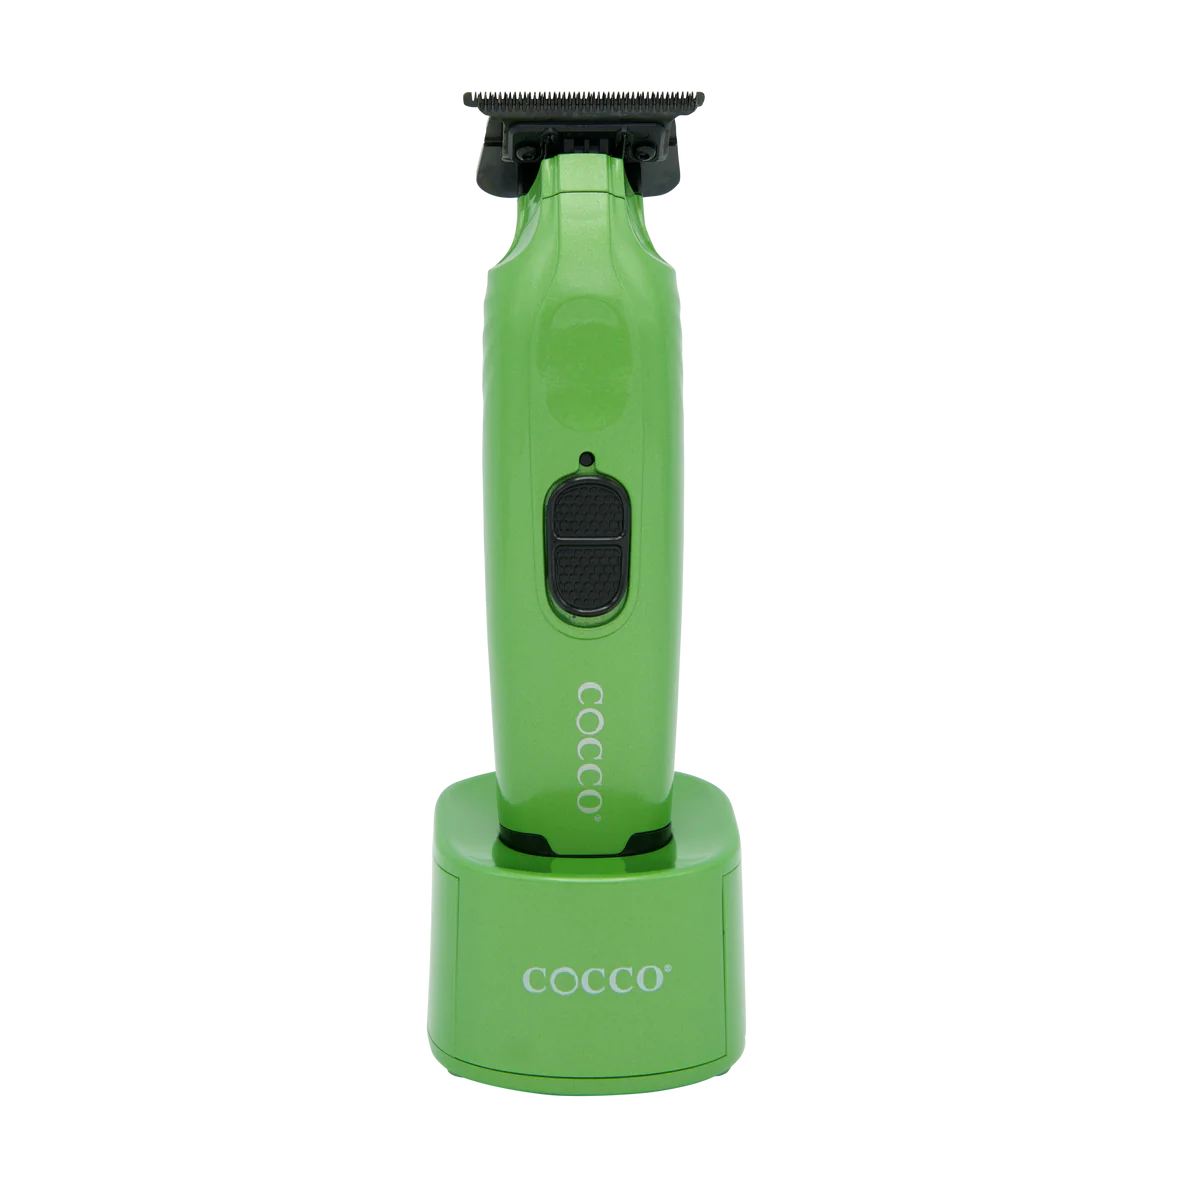 COCCO HYPER PRO TRIMMERS